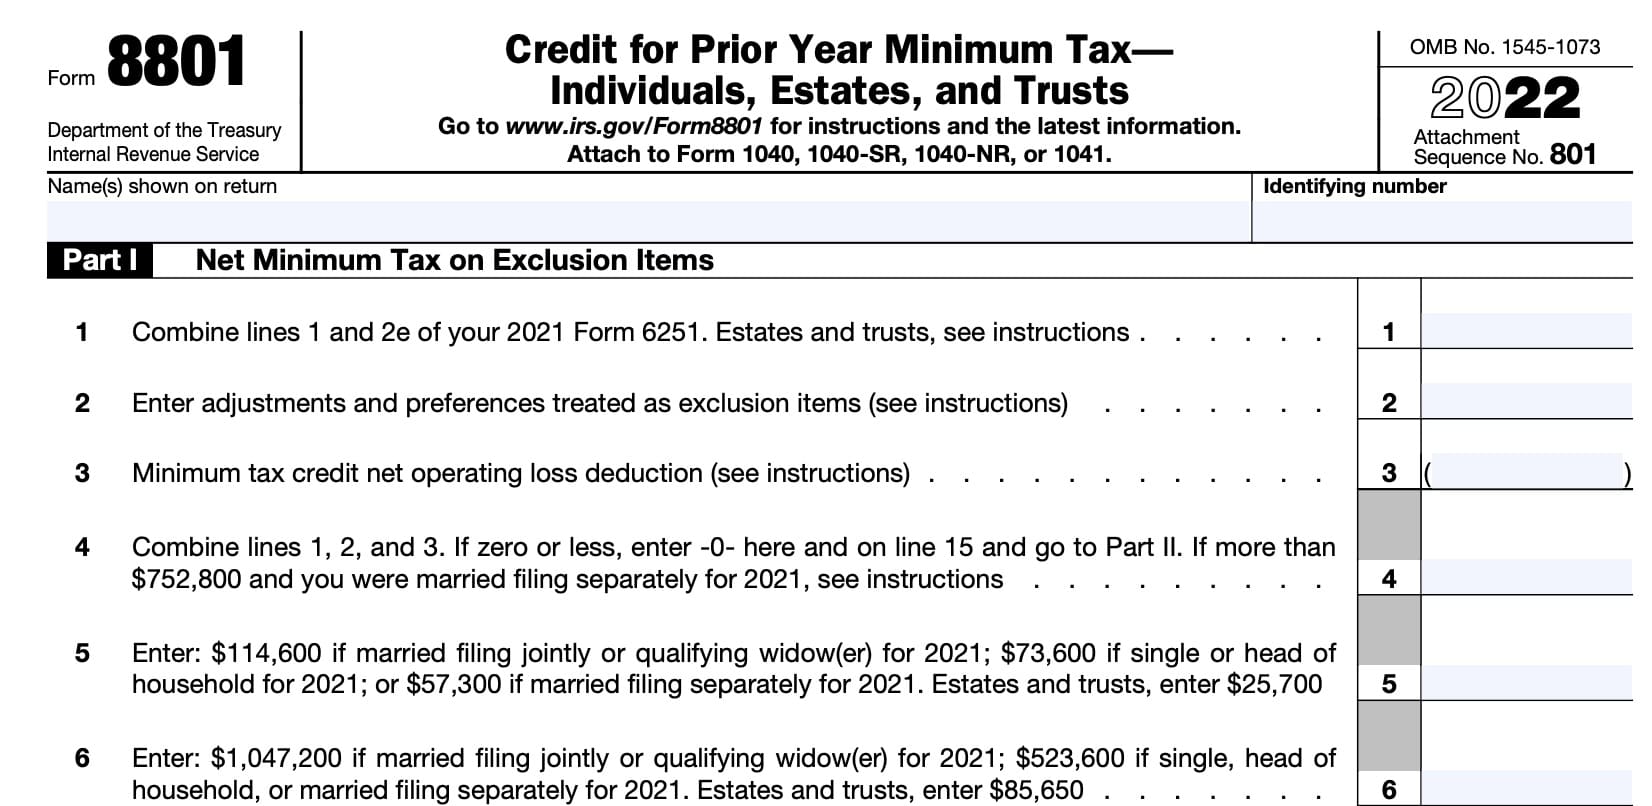 irs form 8801, part i: net minimum tax on exclusion items, lines 1 through 6